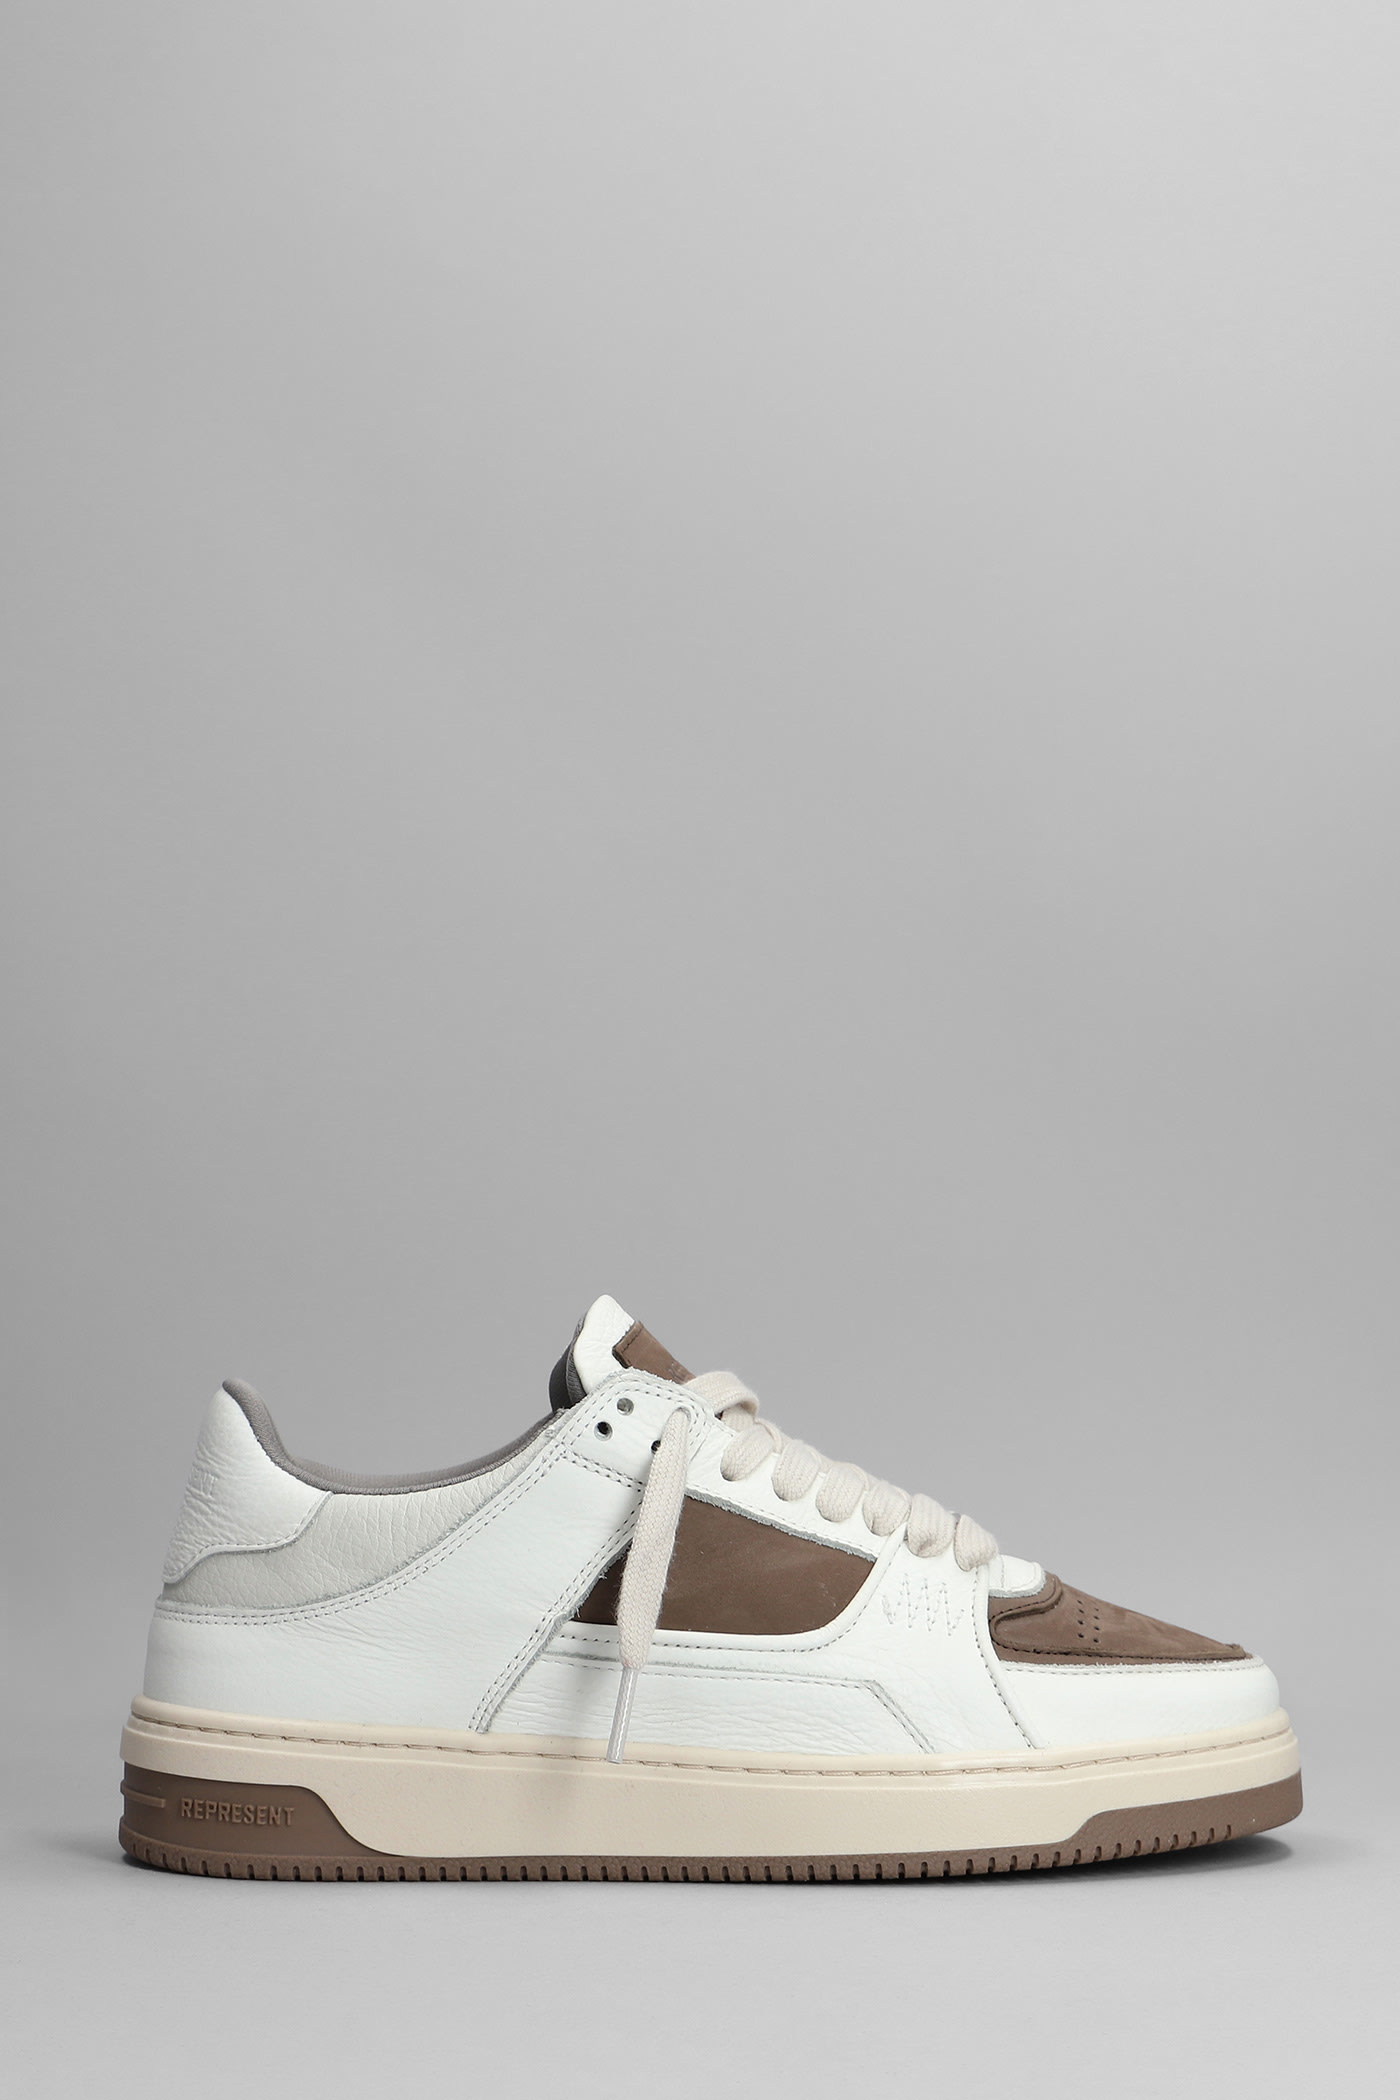 REPRESENT APEX SNEAKERS IN WHITE LEATHER